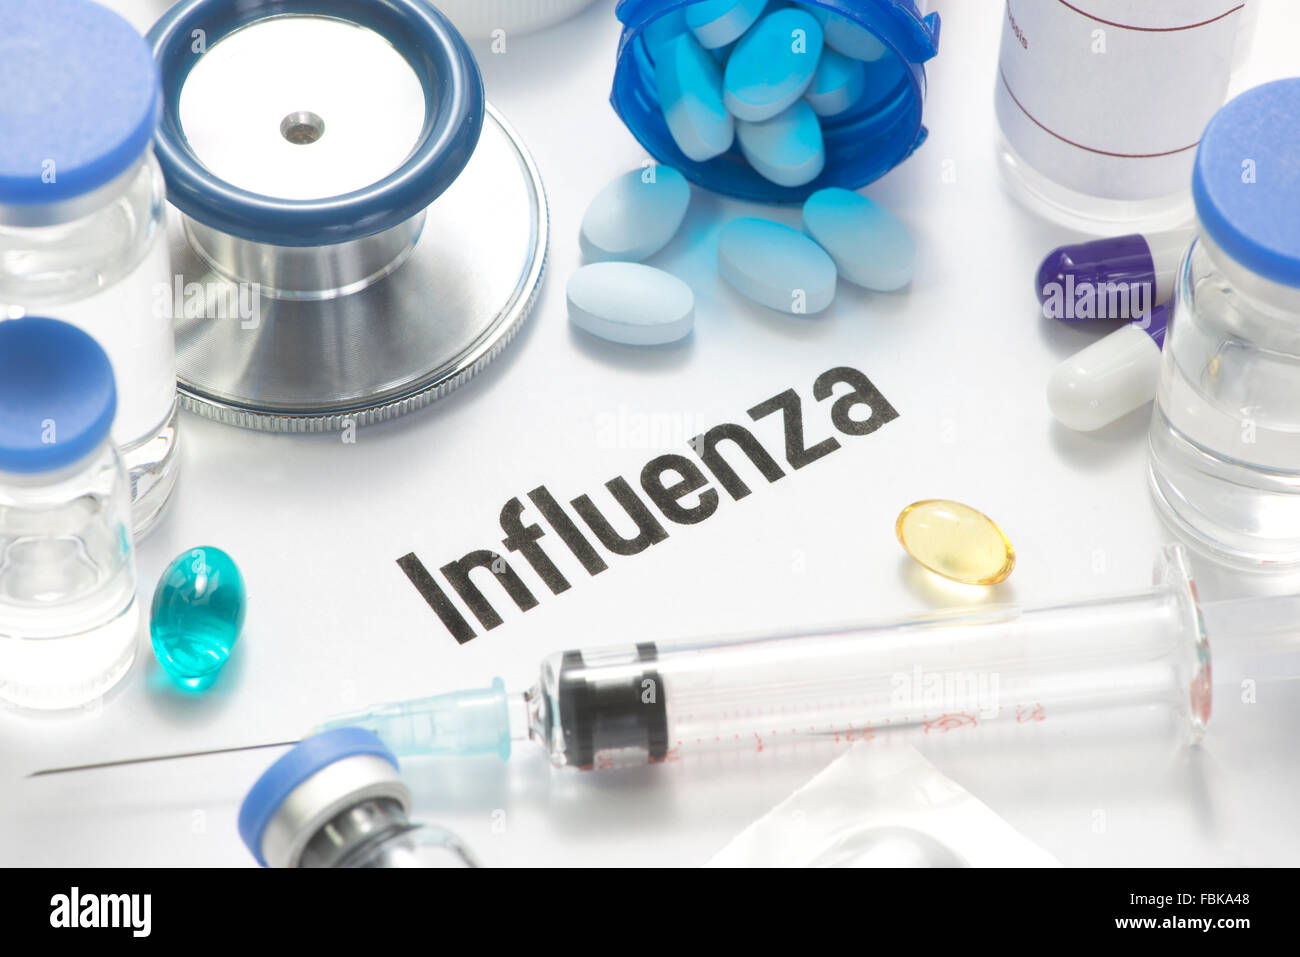 Influenza concept photo with pills, syringe, vials, and stethoscope. Stock Photo